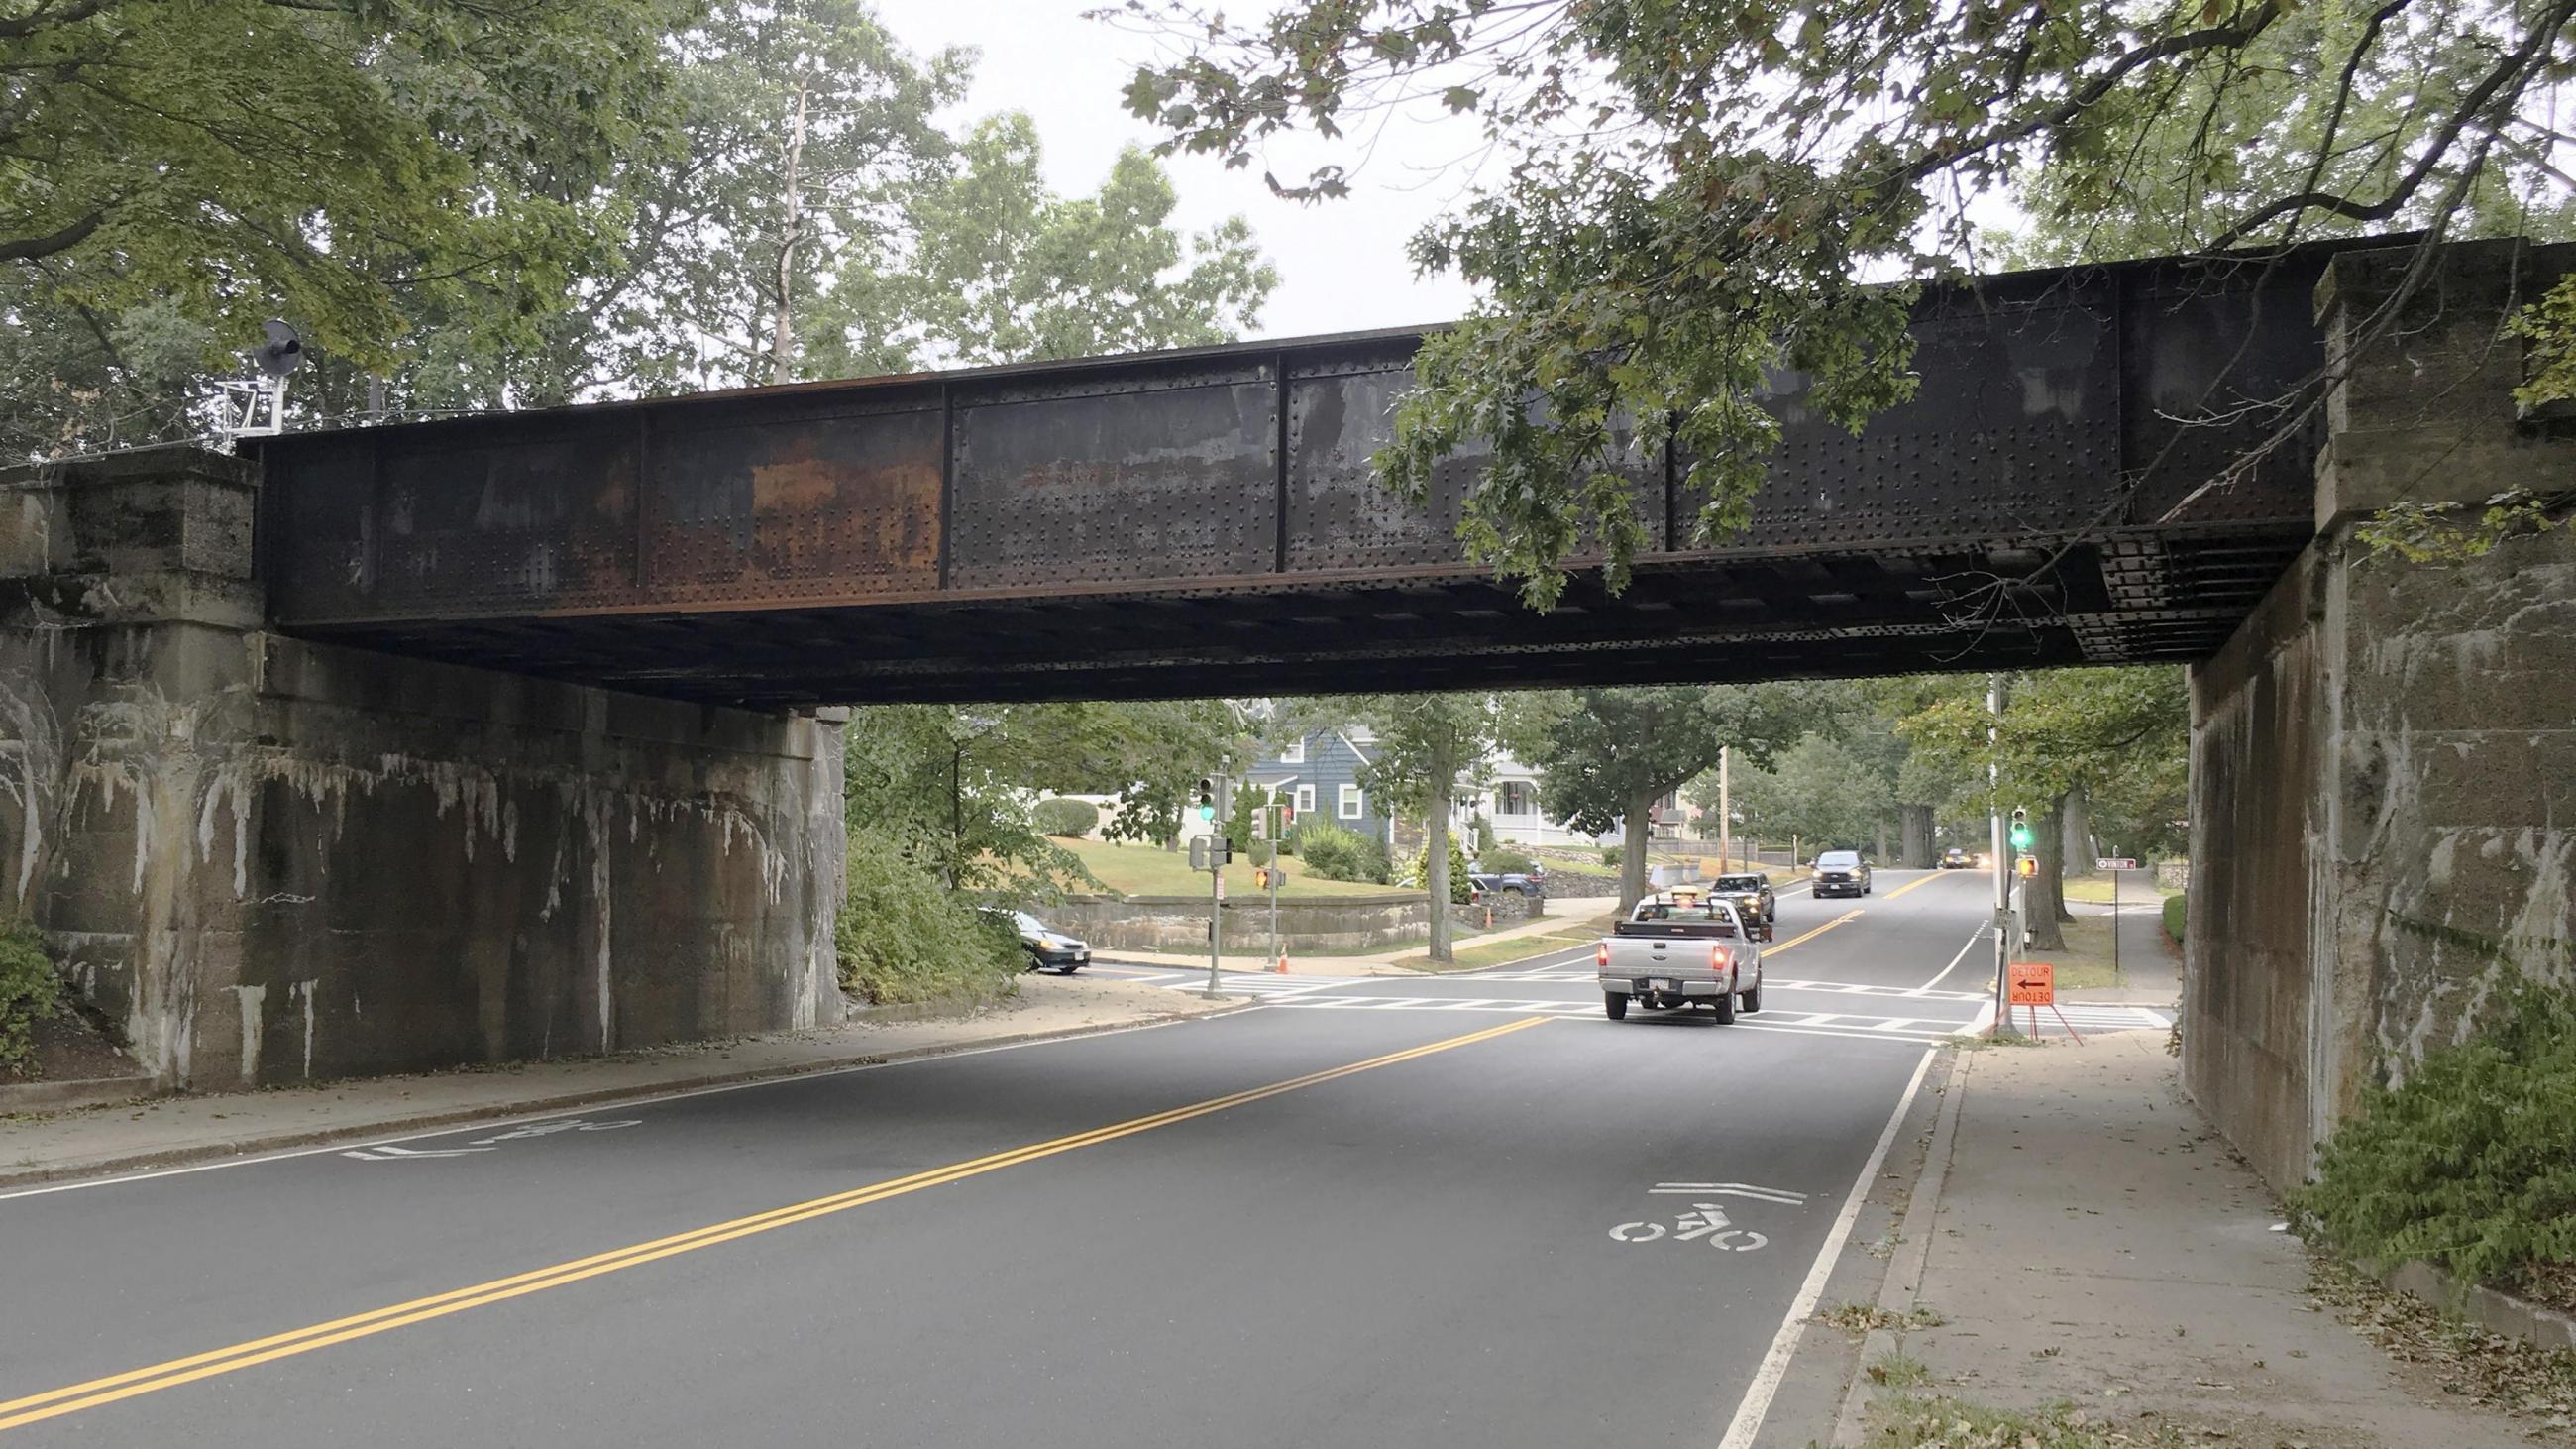 The existing Lynn Fells Parkway bridge on the Haverhill Line of the Commuter Rail